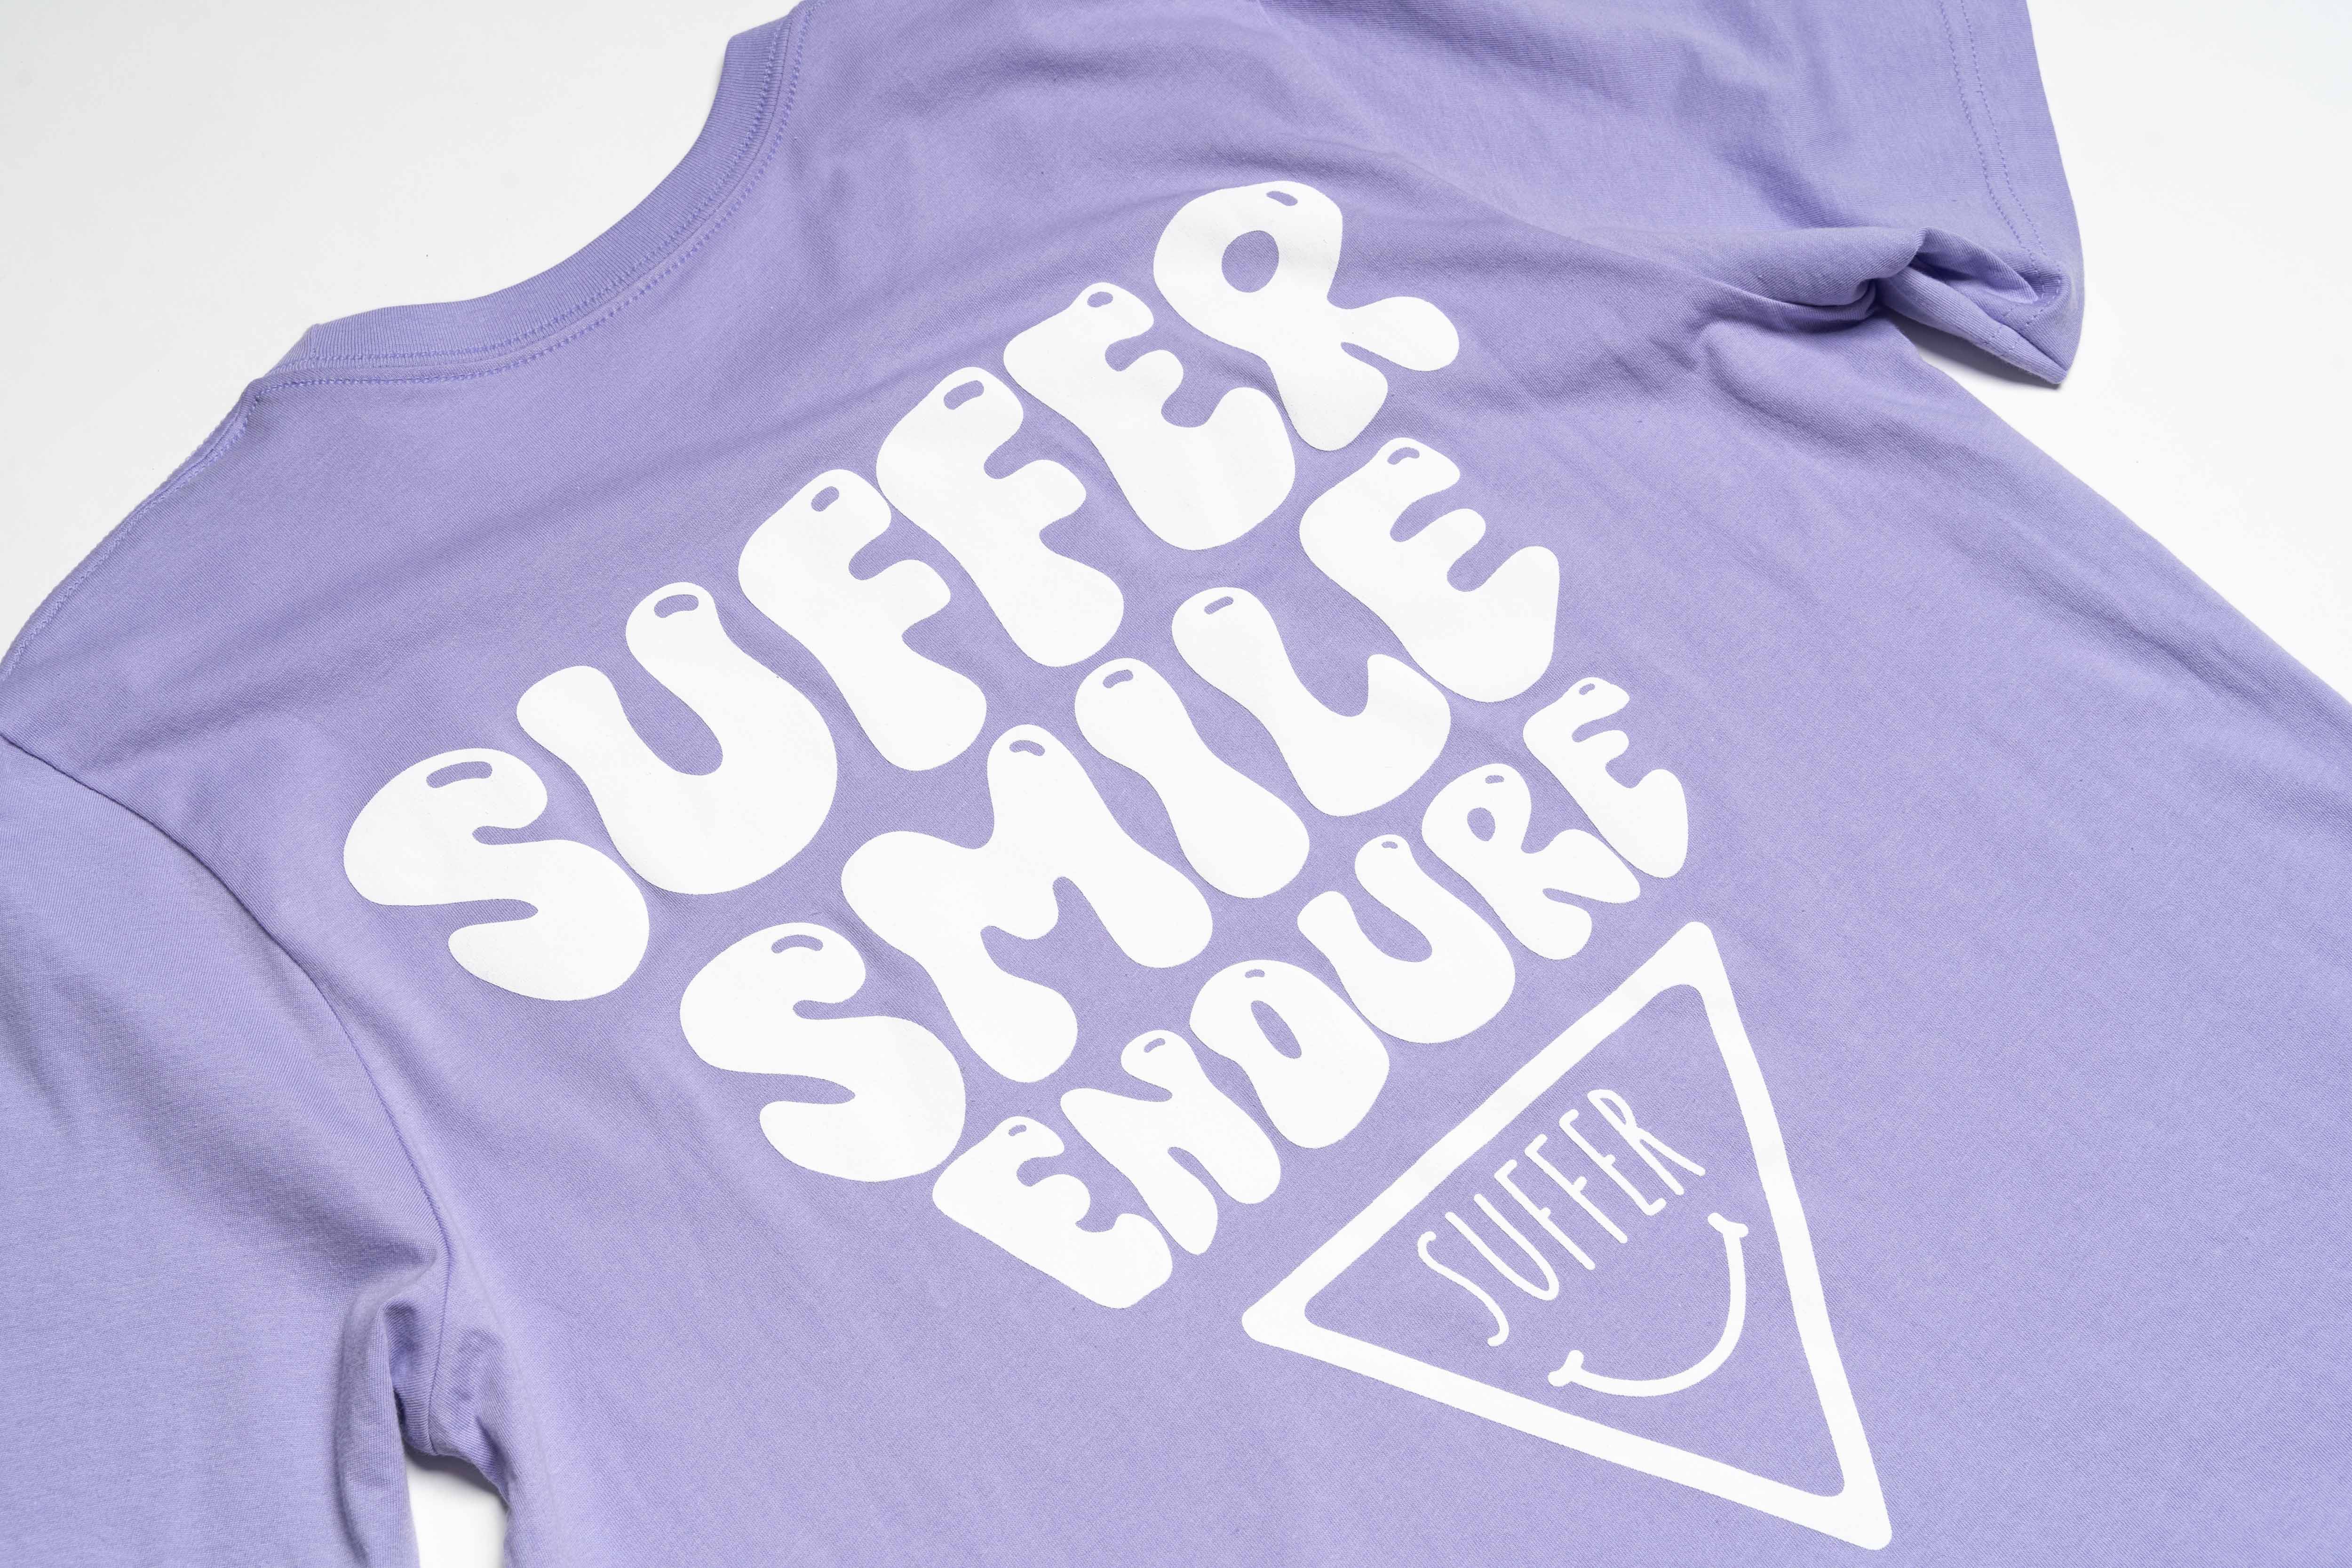 Suffer Smile Endure Spring Edition Tee